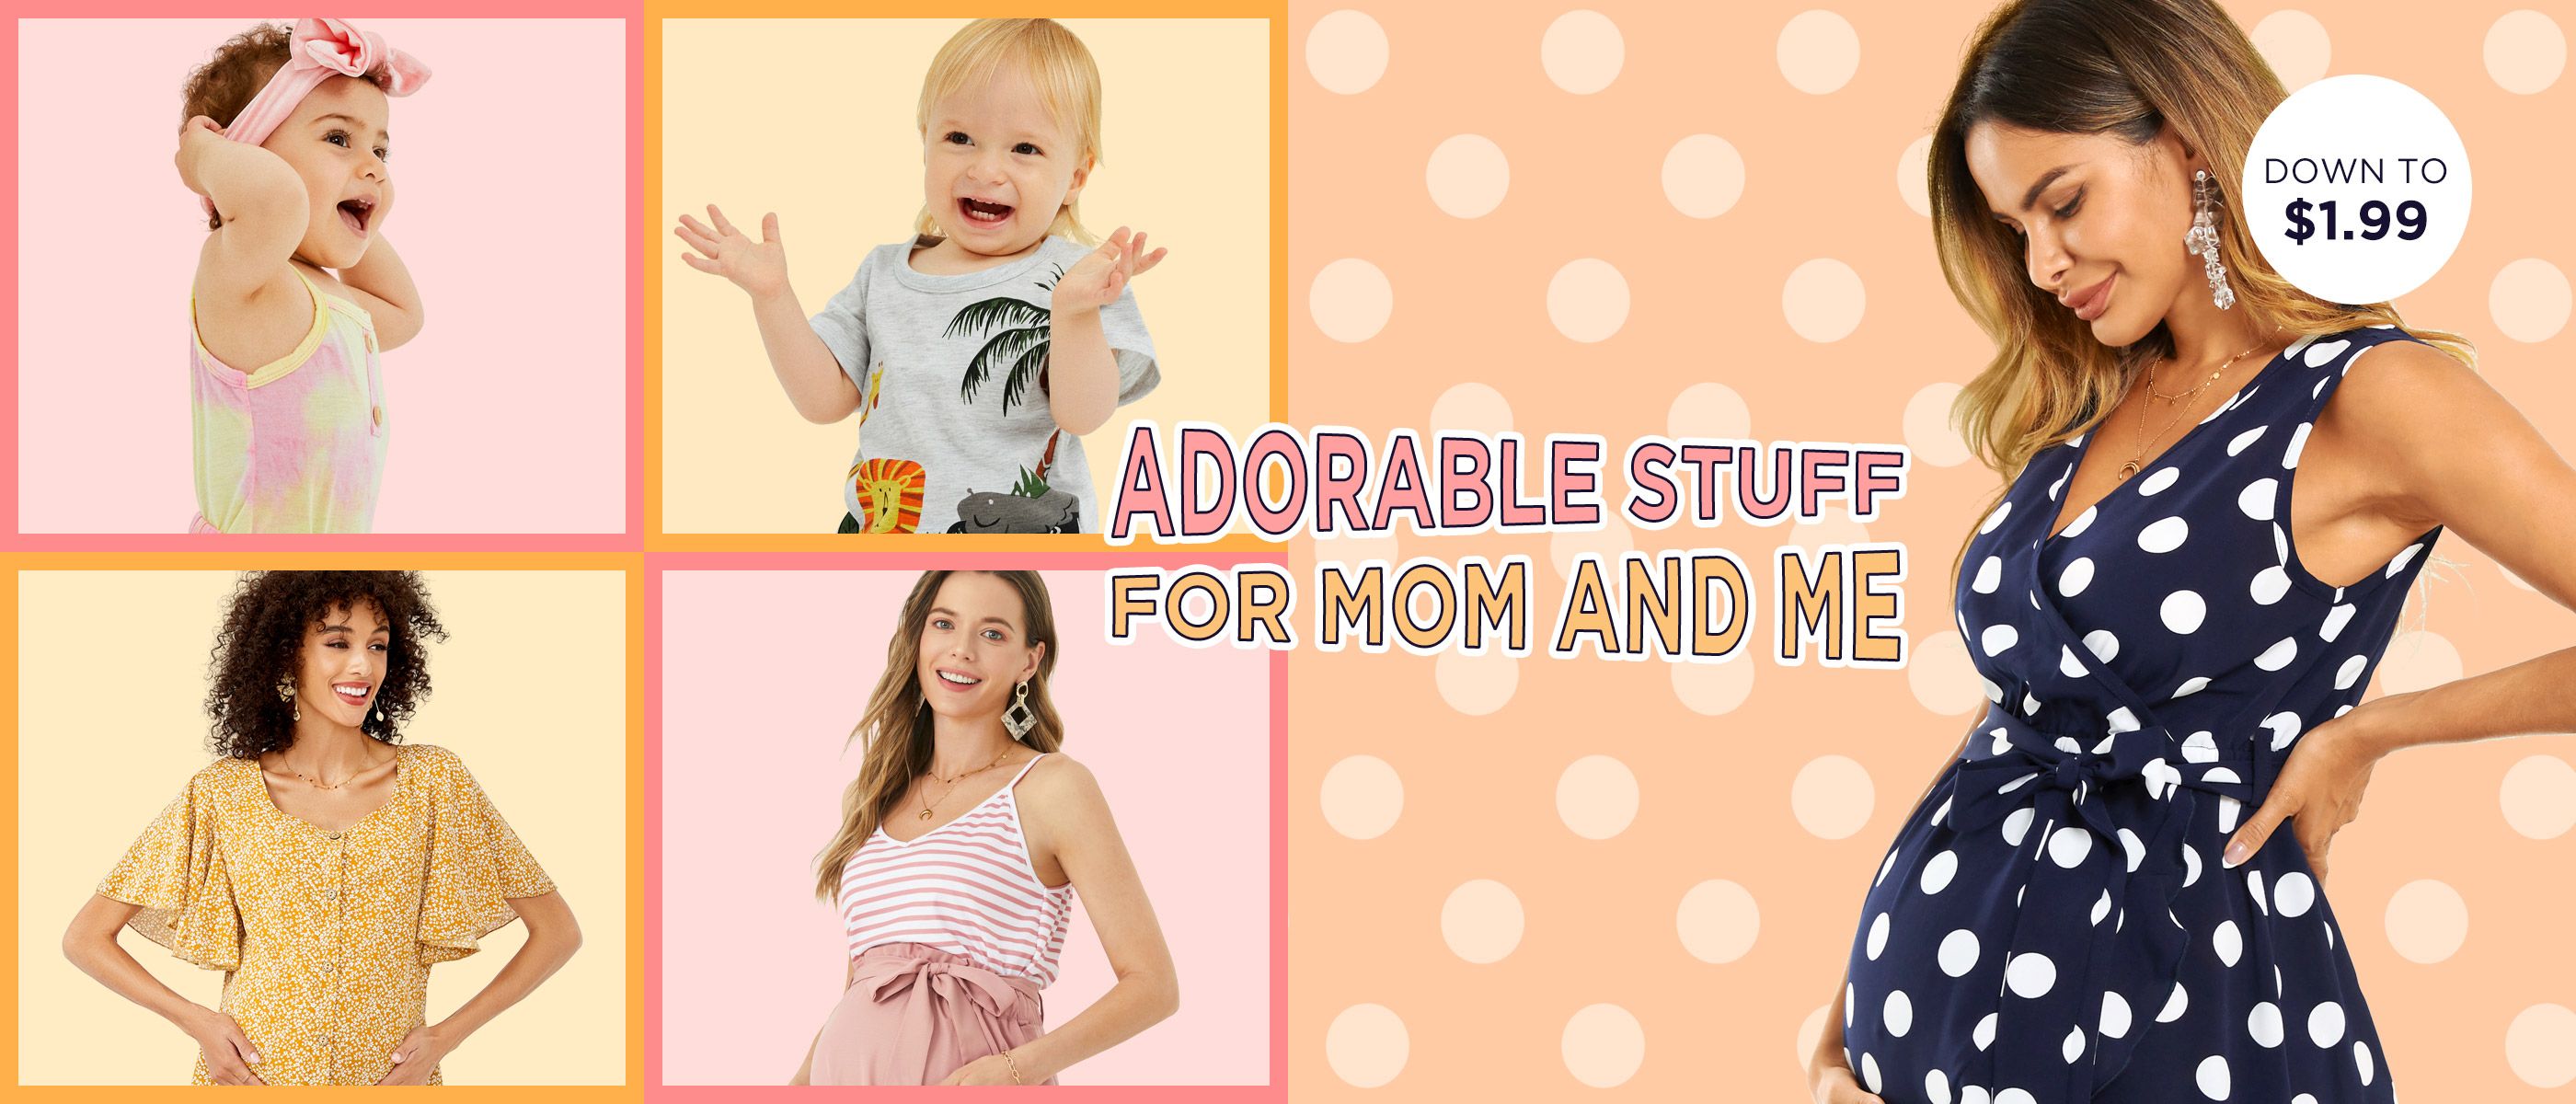 Adorable Stuff For Mom And Me